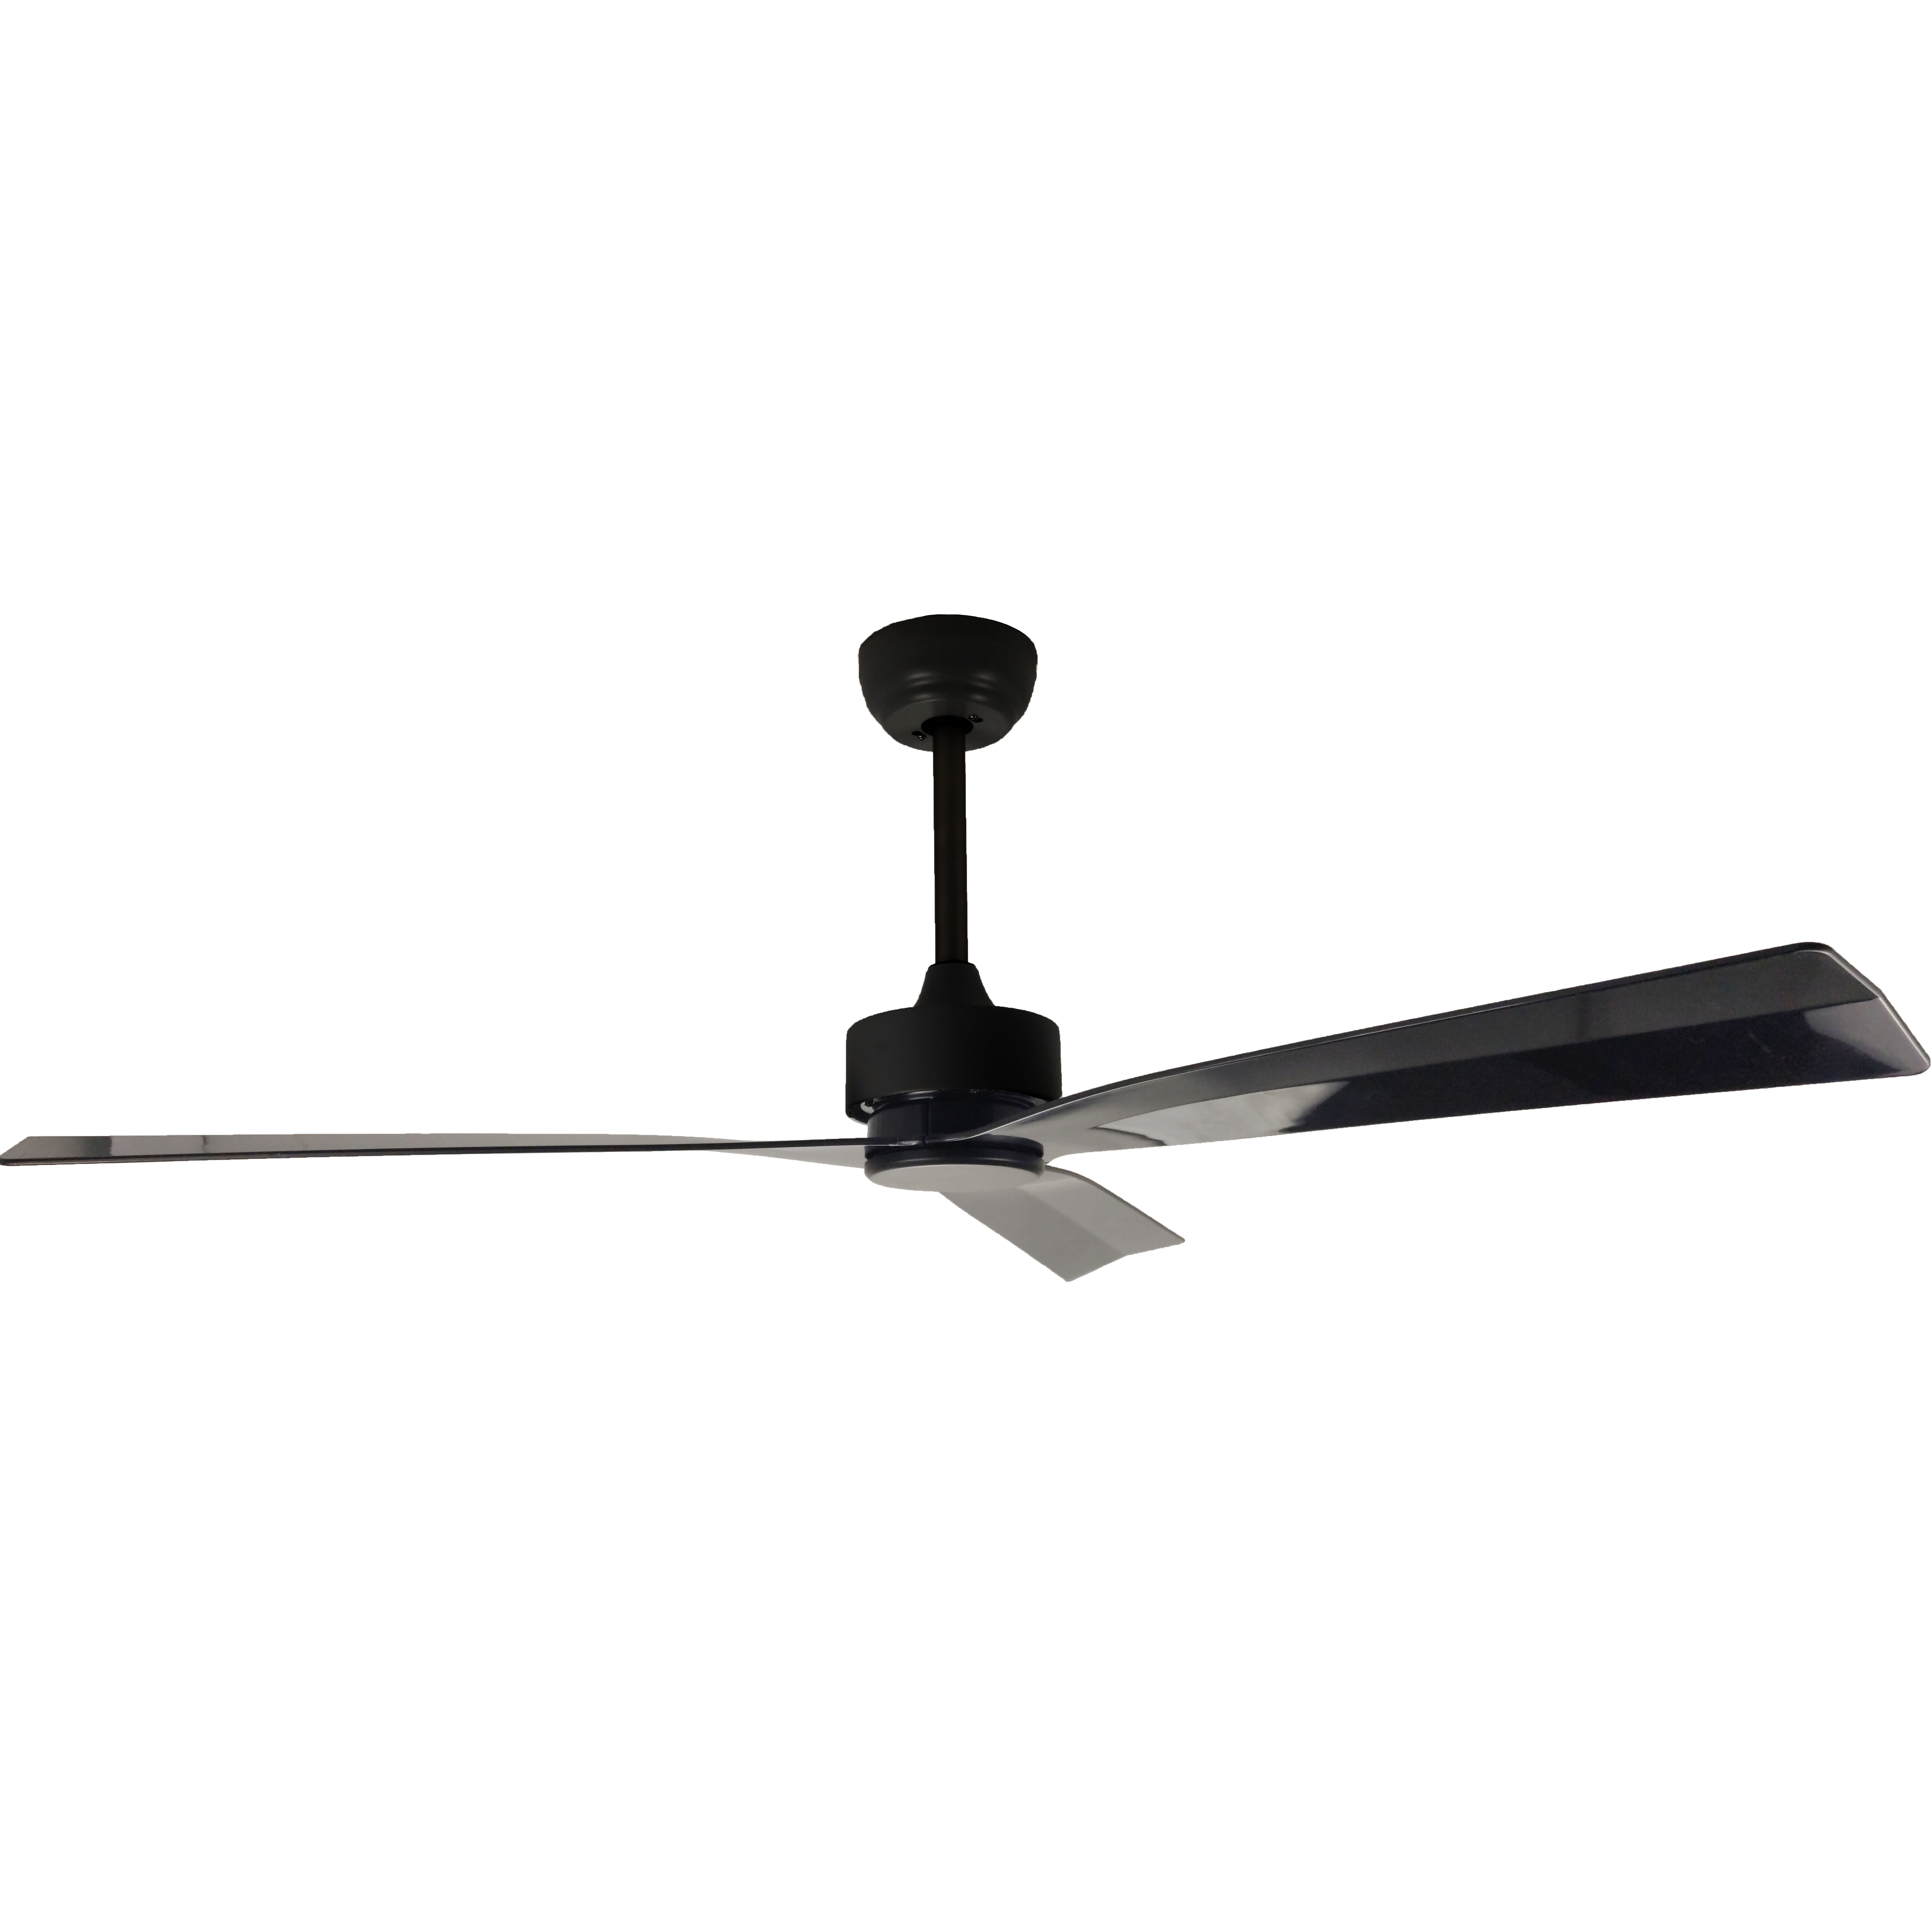 AirBena 52 Inch Remote Control Ceiling Fan with Light